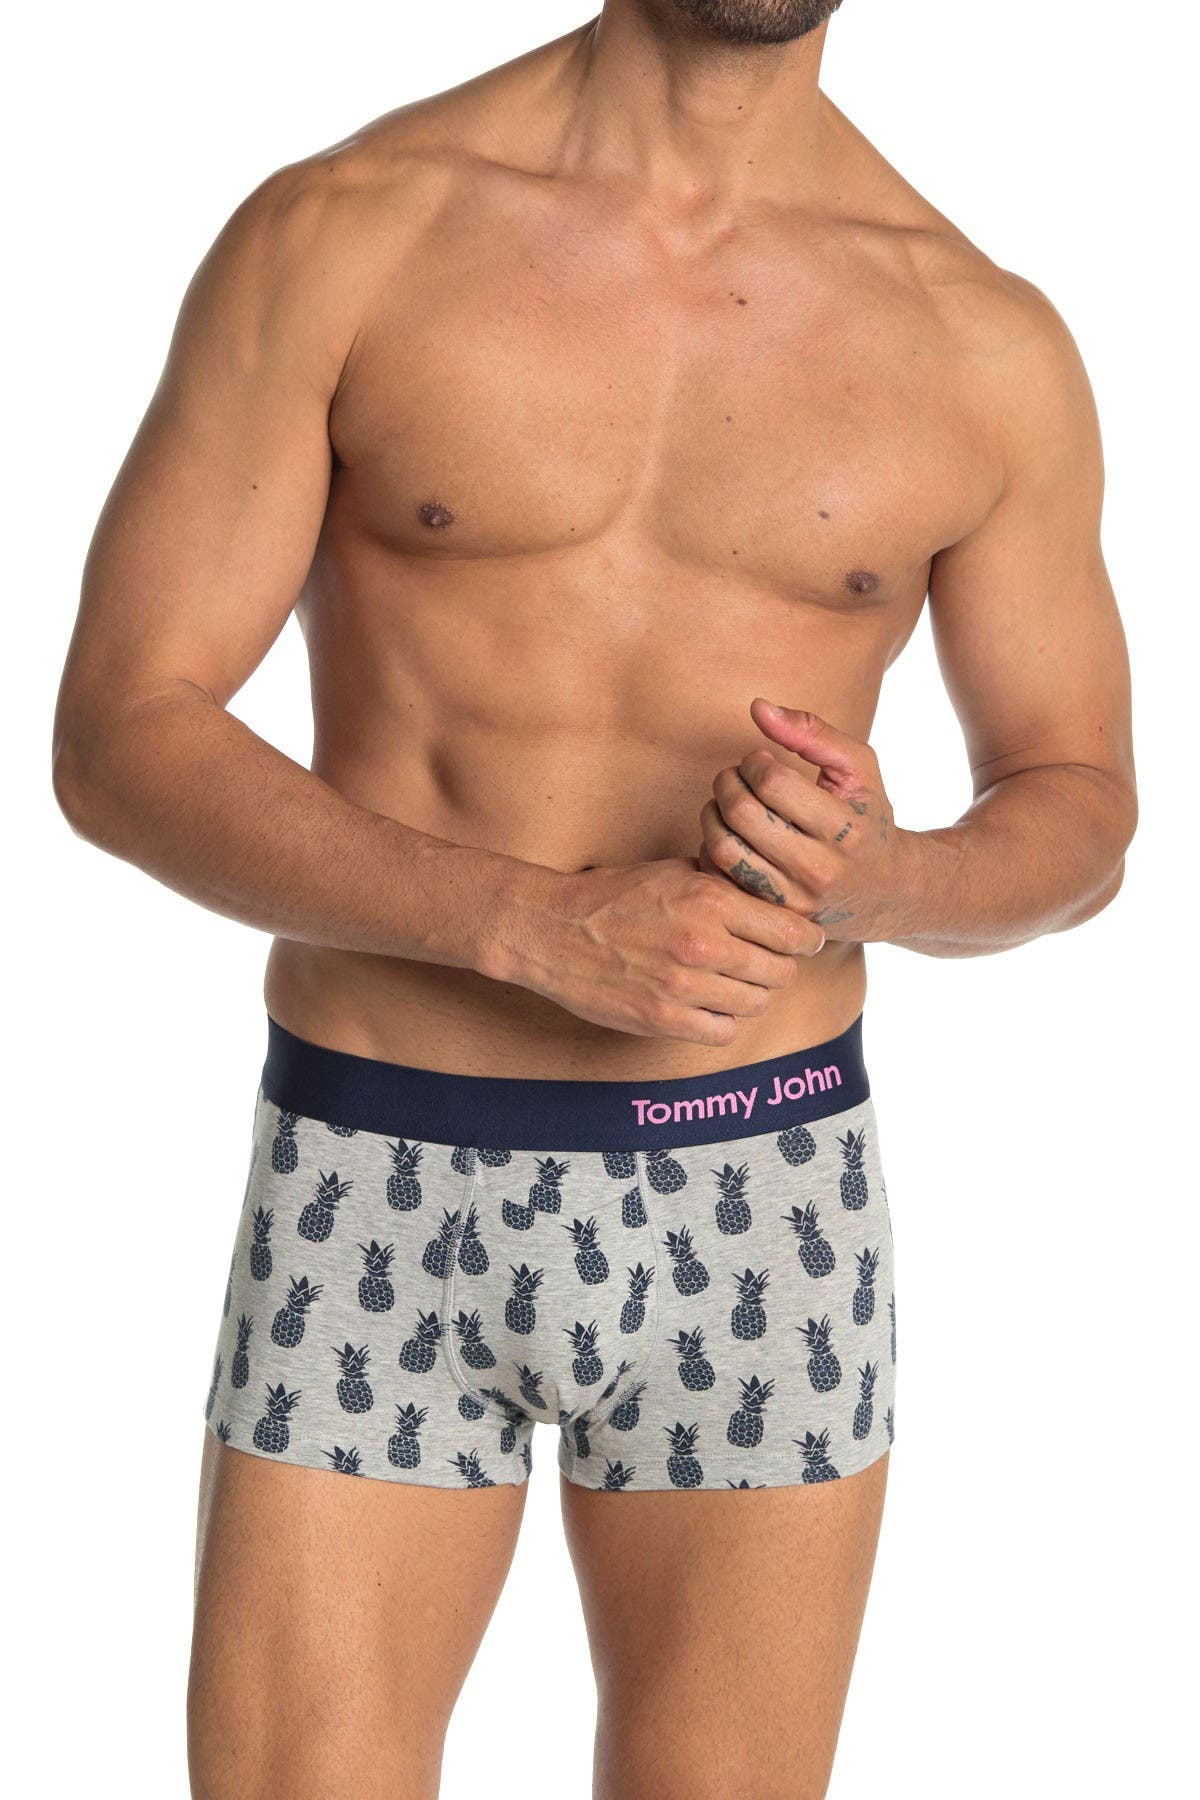 tommy john cool cotton brief